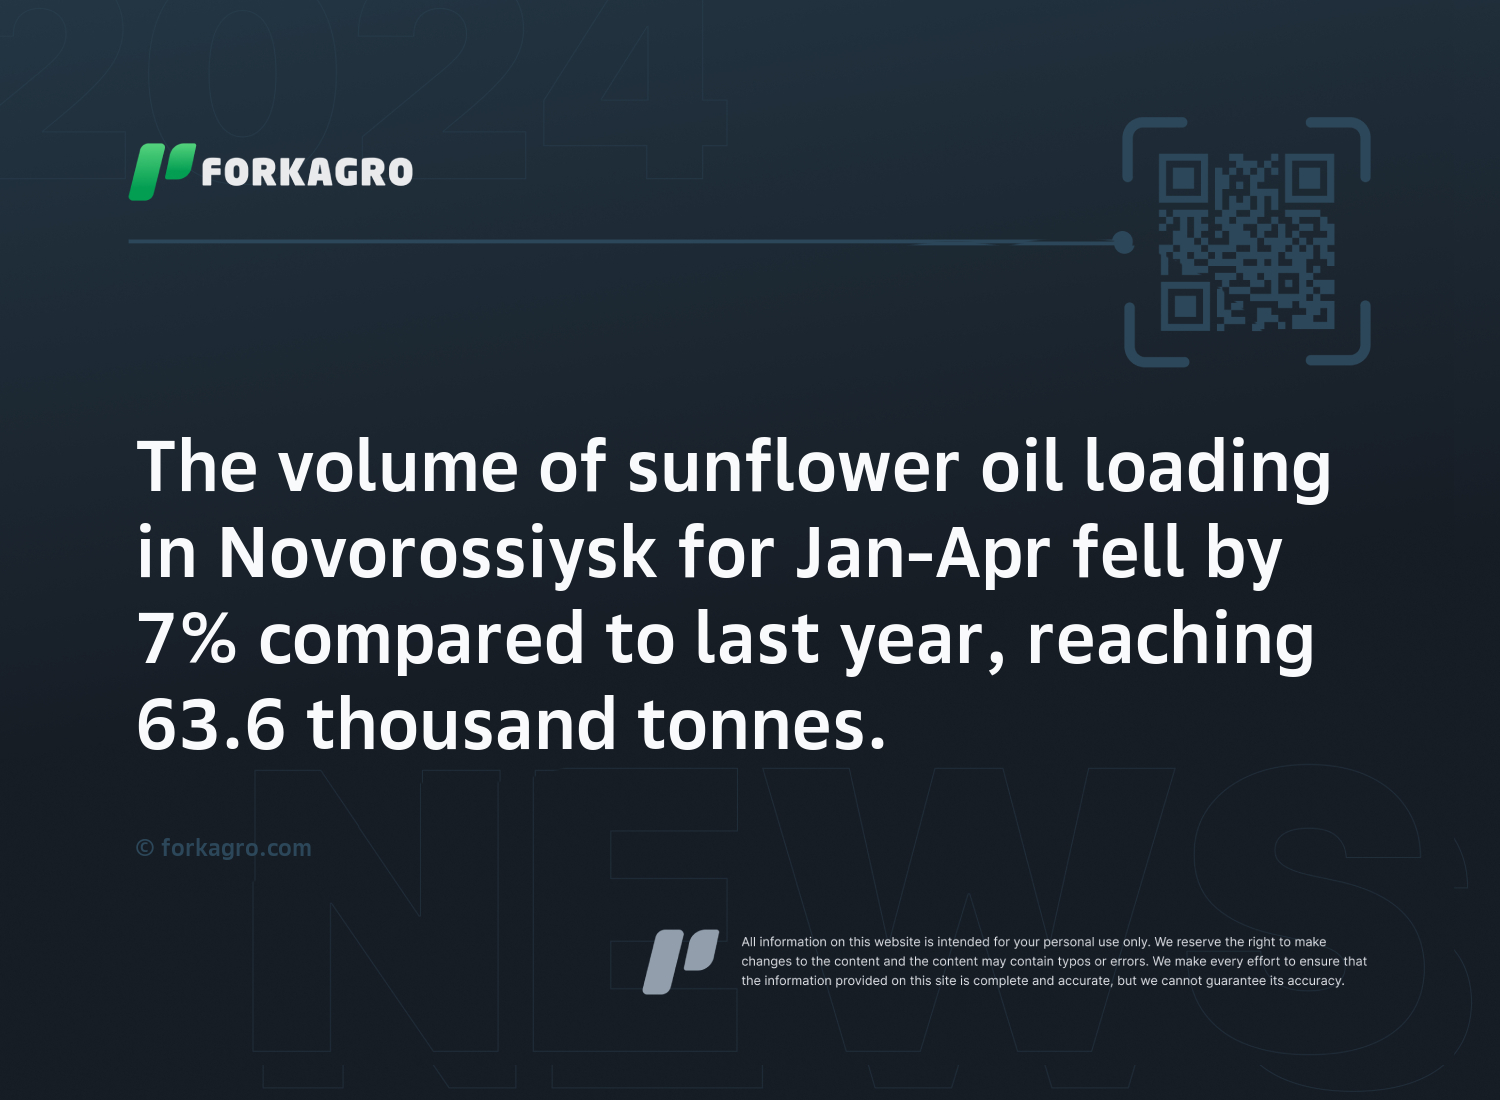 The volume of sunflower oil loading in Novorossiysk for Jan-Apr fell by 7% compared to last year, reaching 63.6 thousand tonnes.